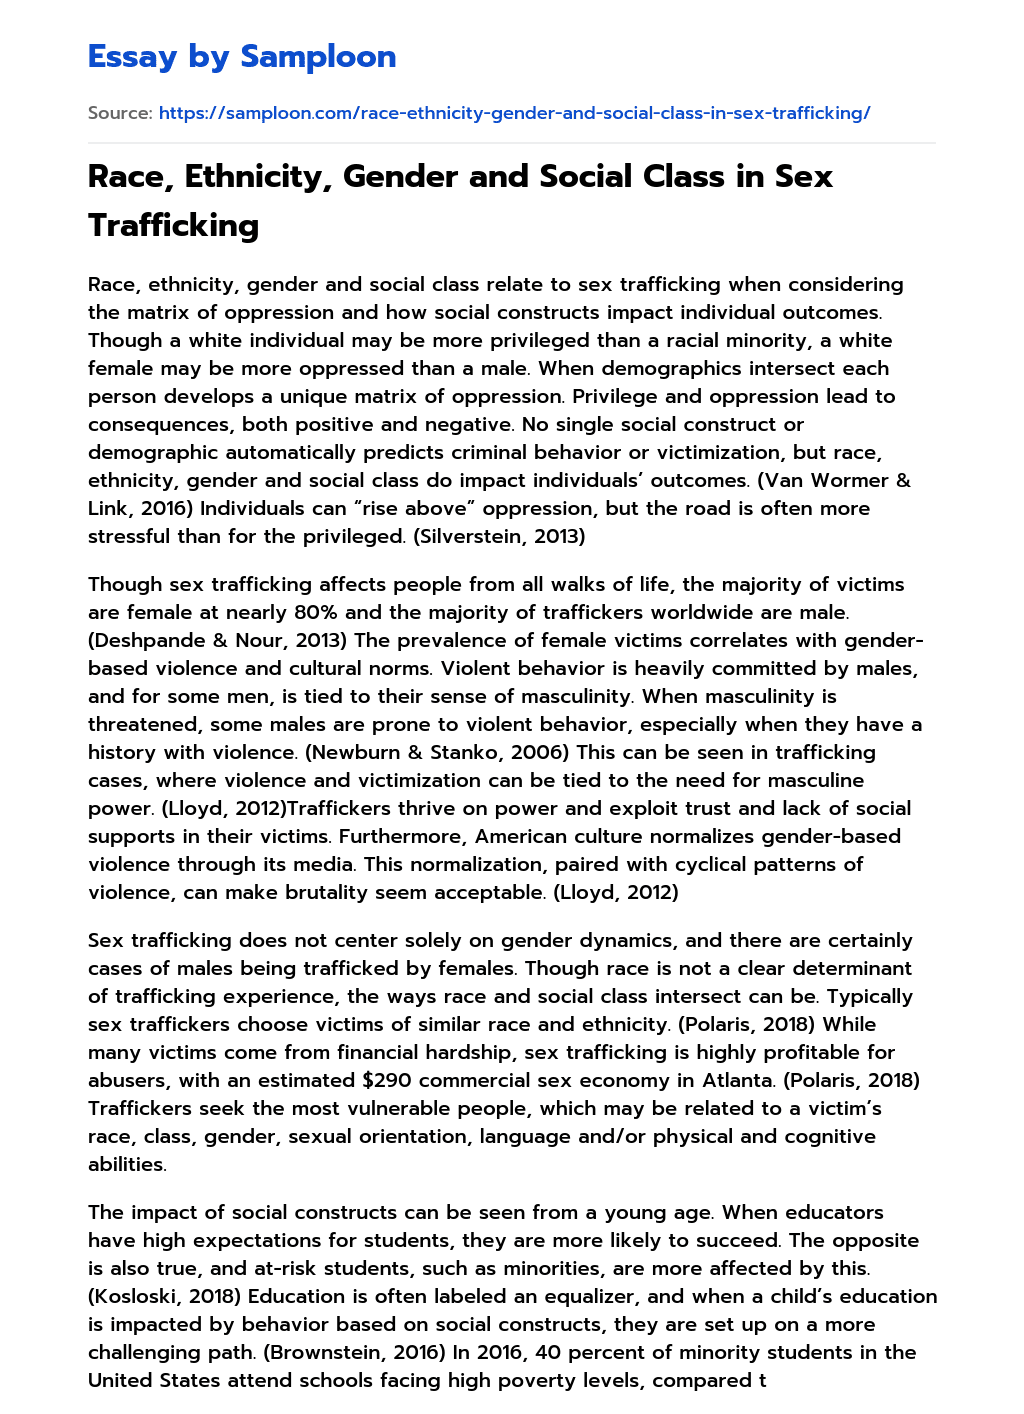 Race, Ethnicity, Gender and Social Class in Sex Trafficking essay